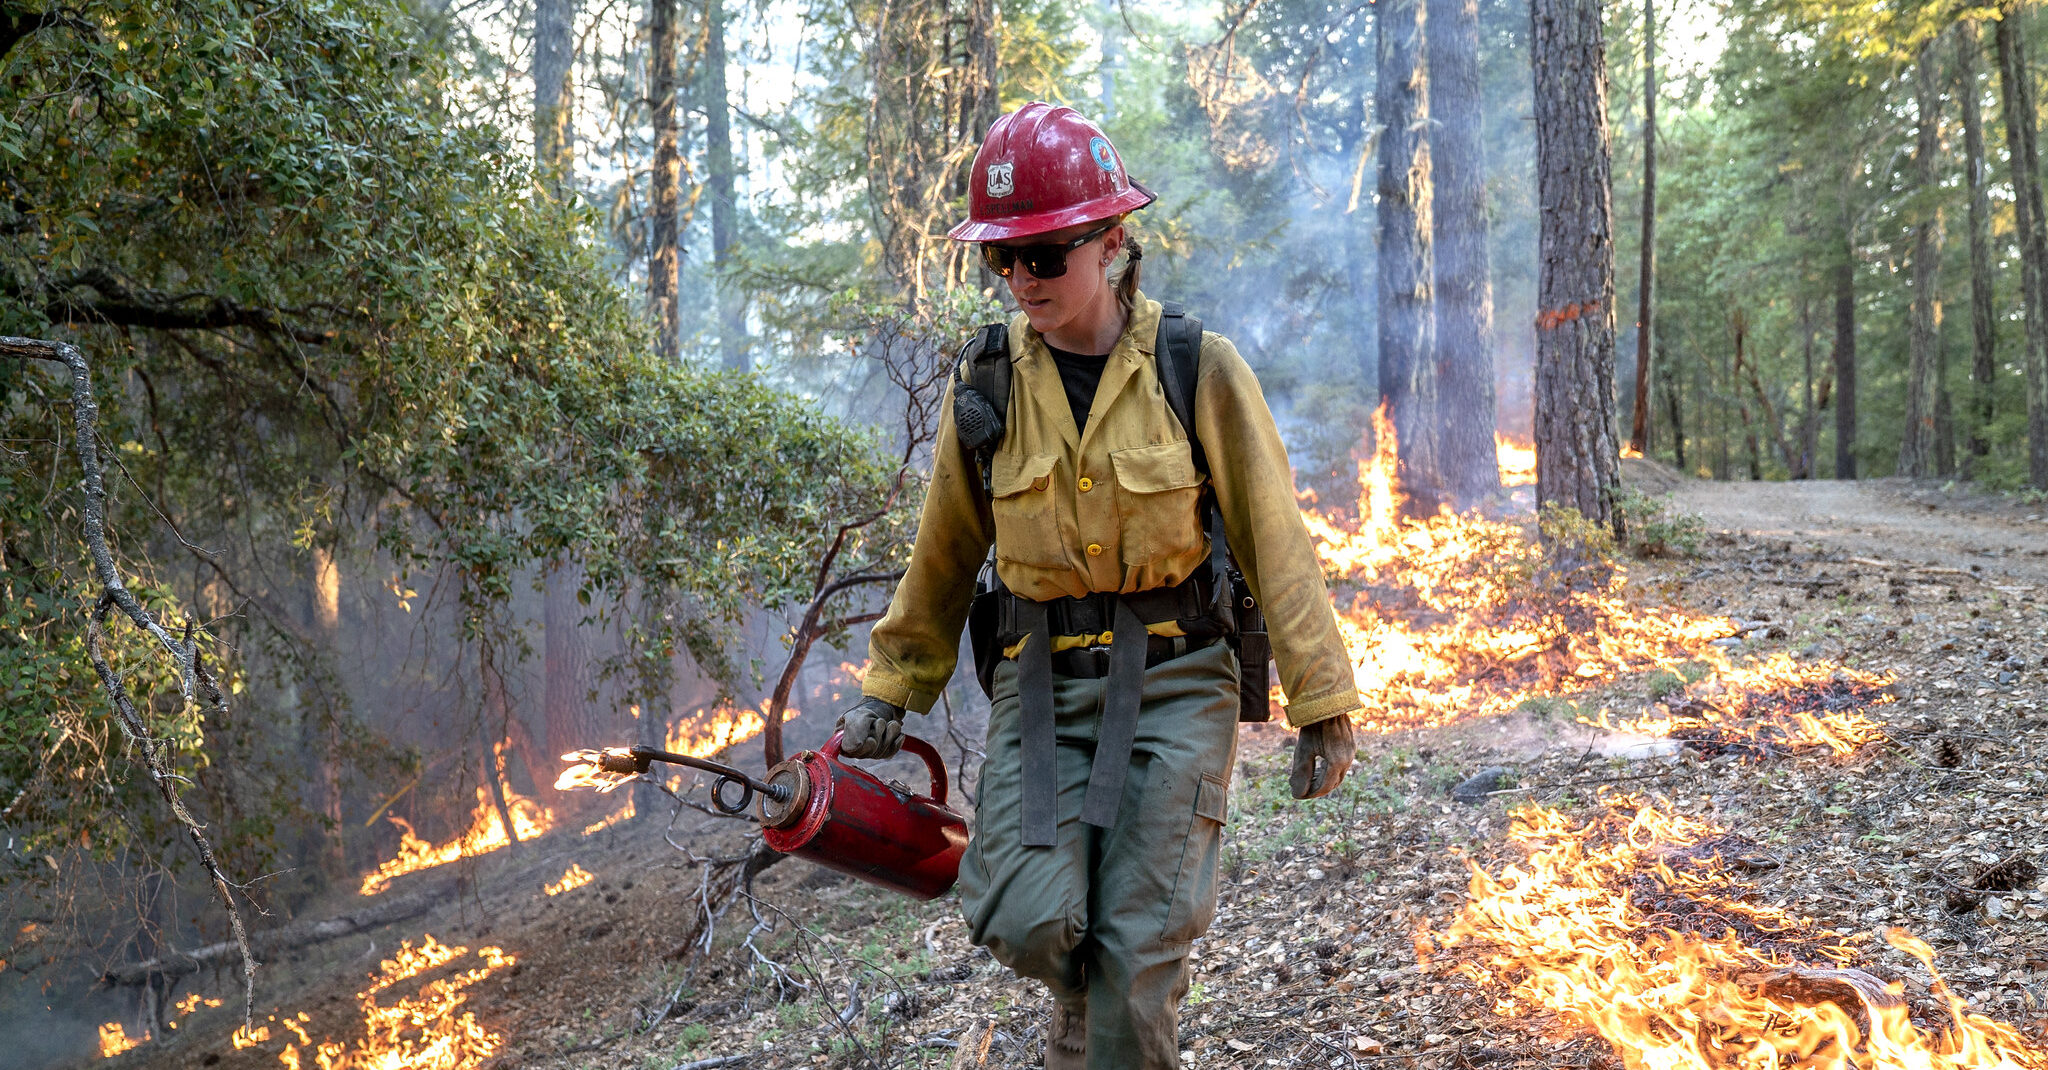 Firefighter in a low-burning forest controlling smaller fires to prevent bigger fires.